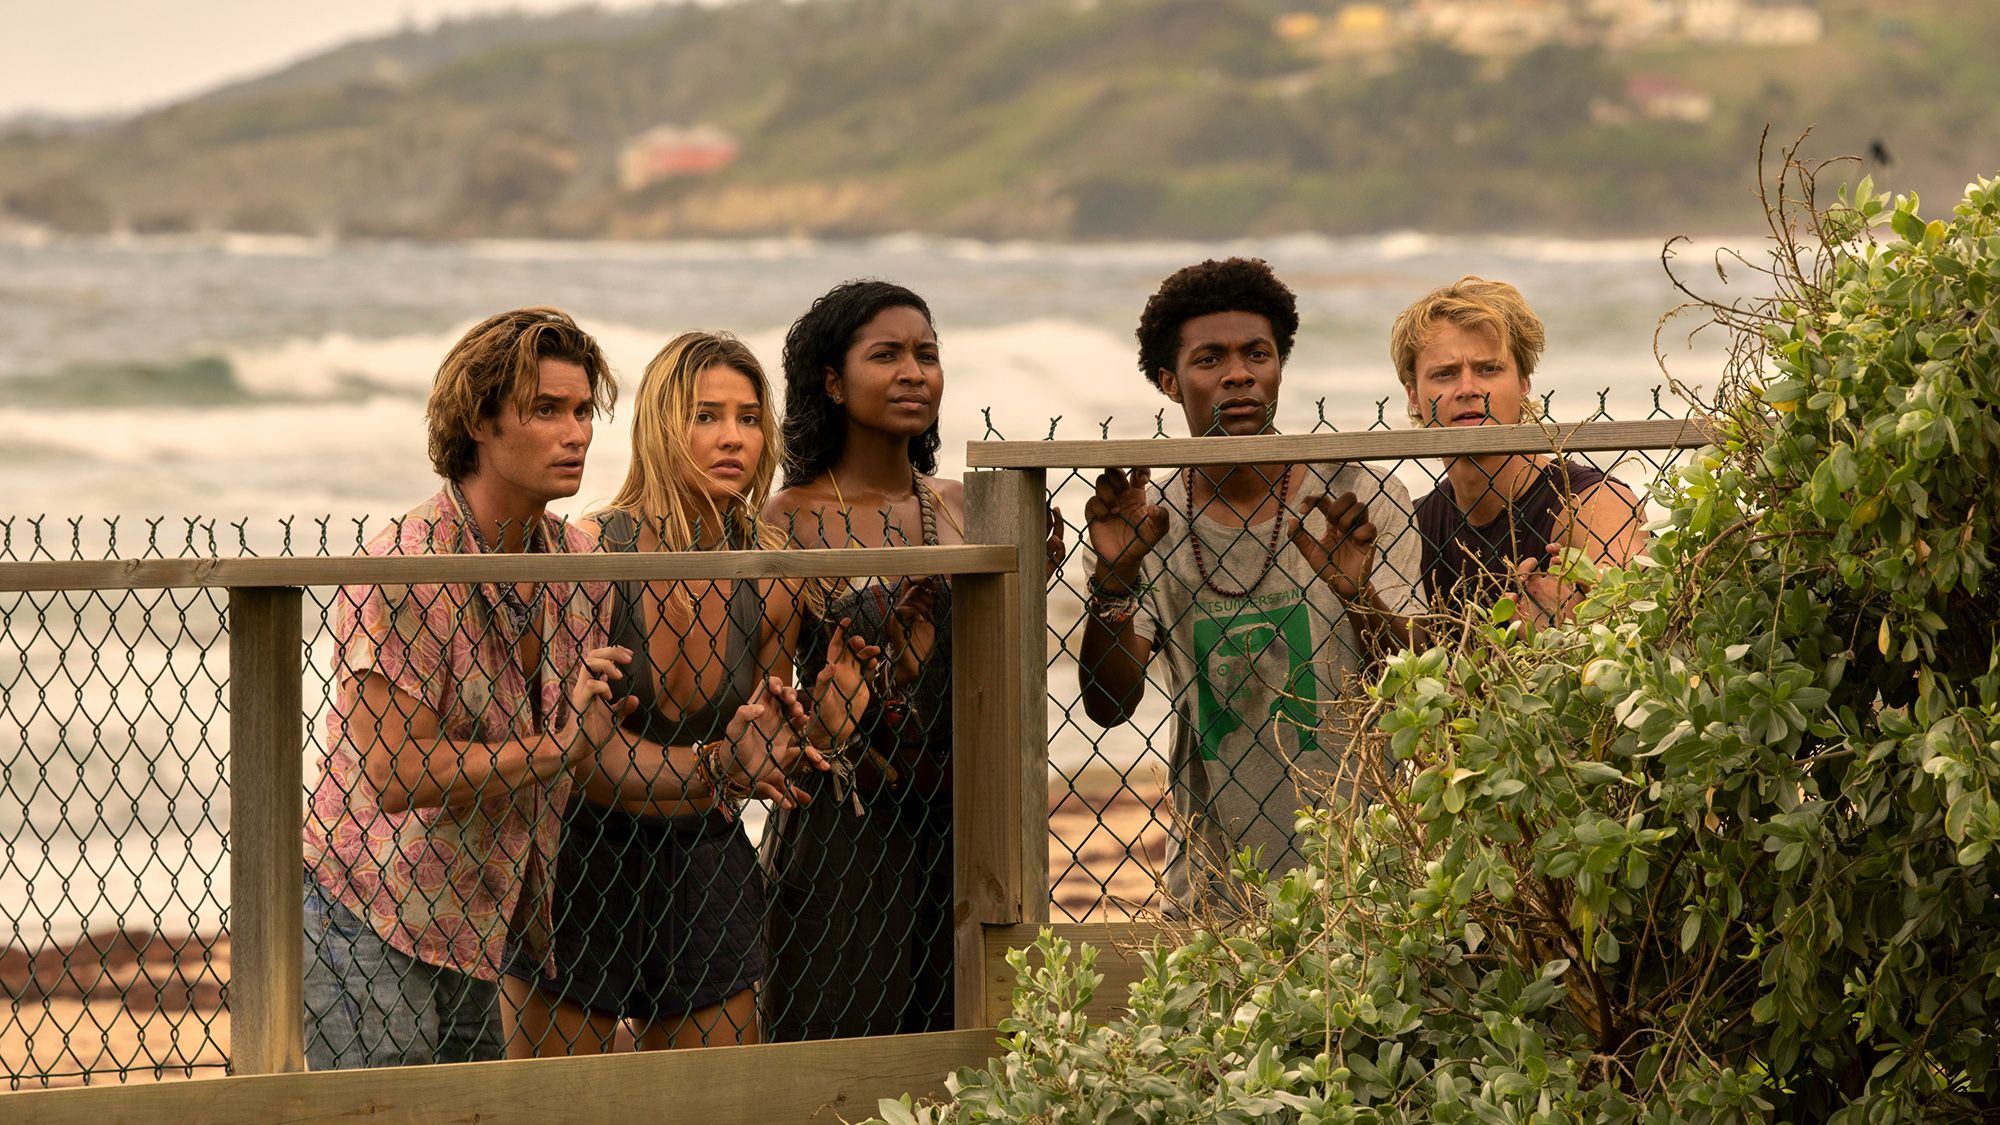 All of Us Are Dead Season 2 Release Date : Recap, Cast, Review